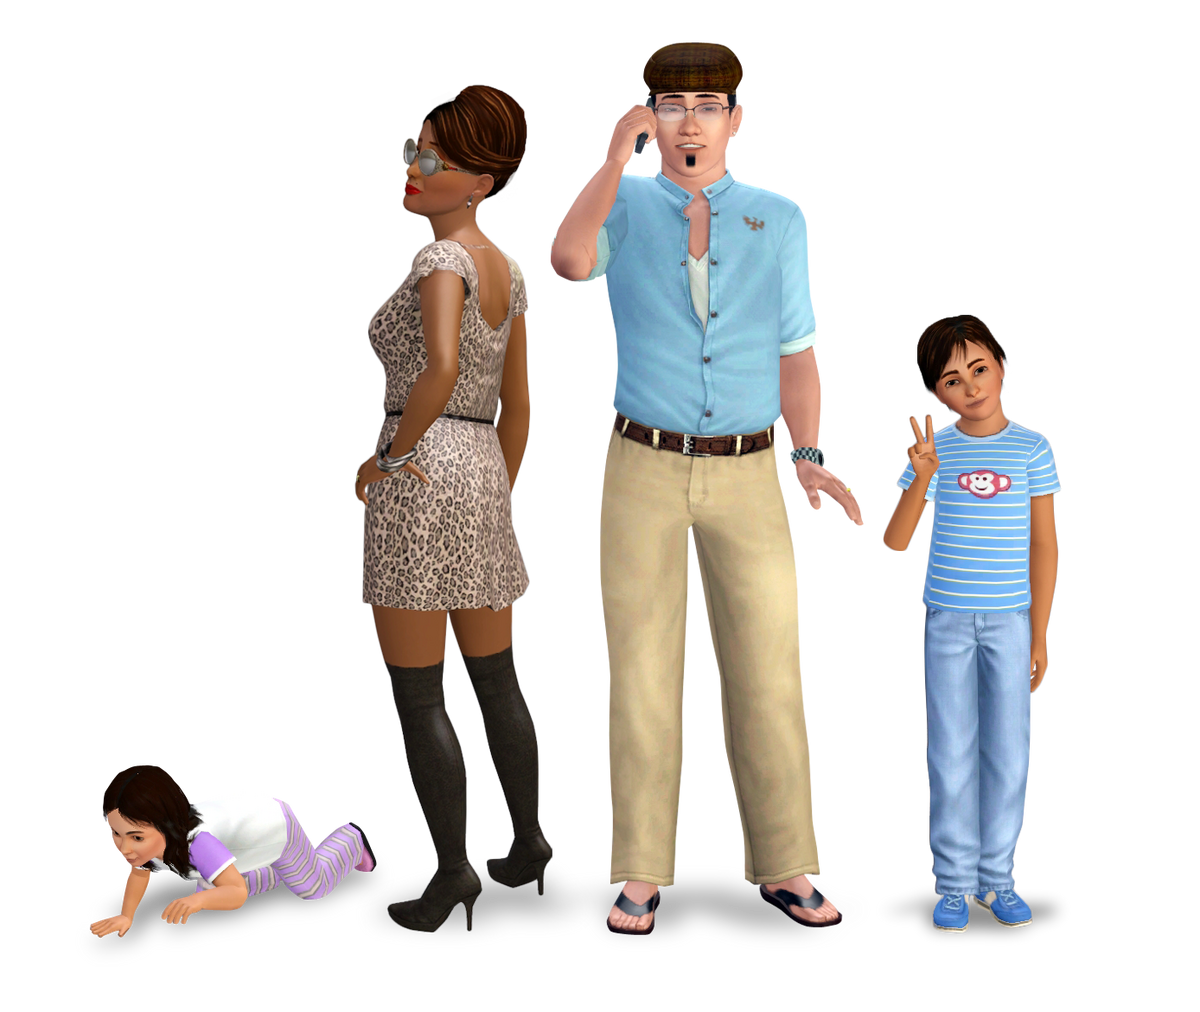 I family 3 d. SIMS 4 семья. The SIMS 3 семья. The SIMS 3 семья и дети. Симс 3 семейка.